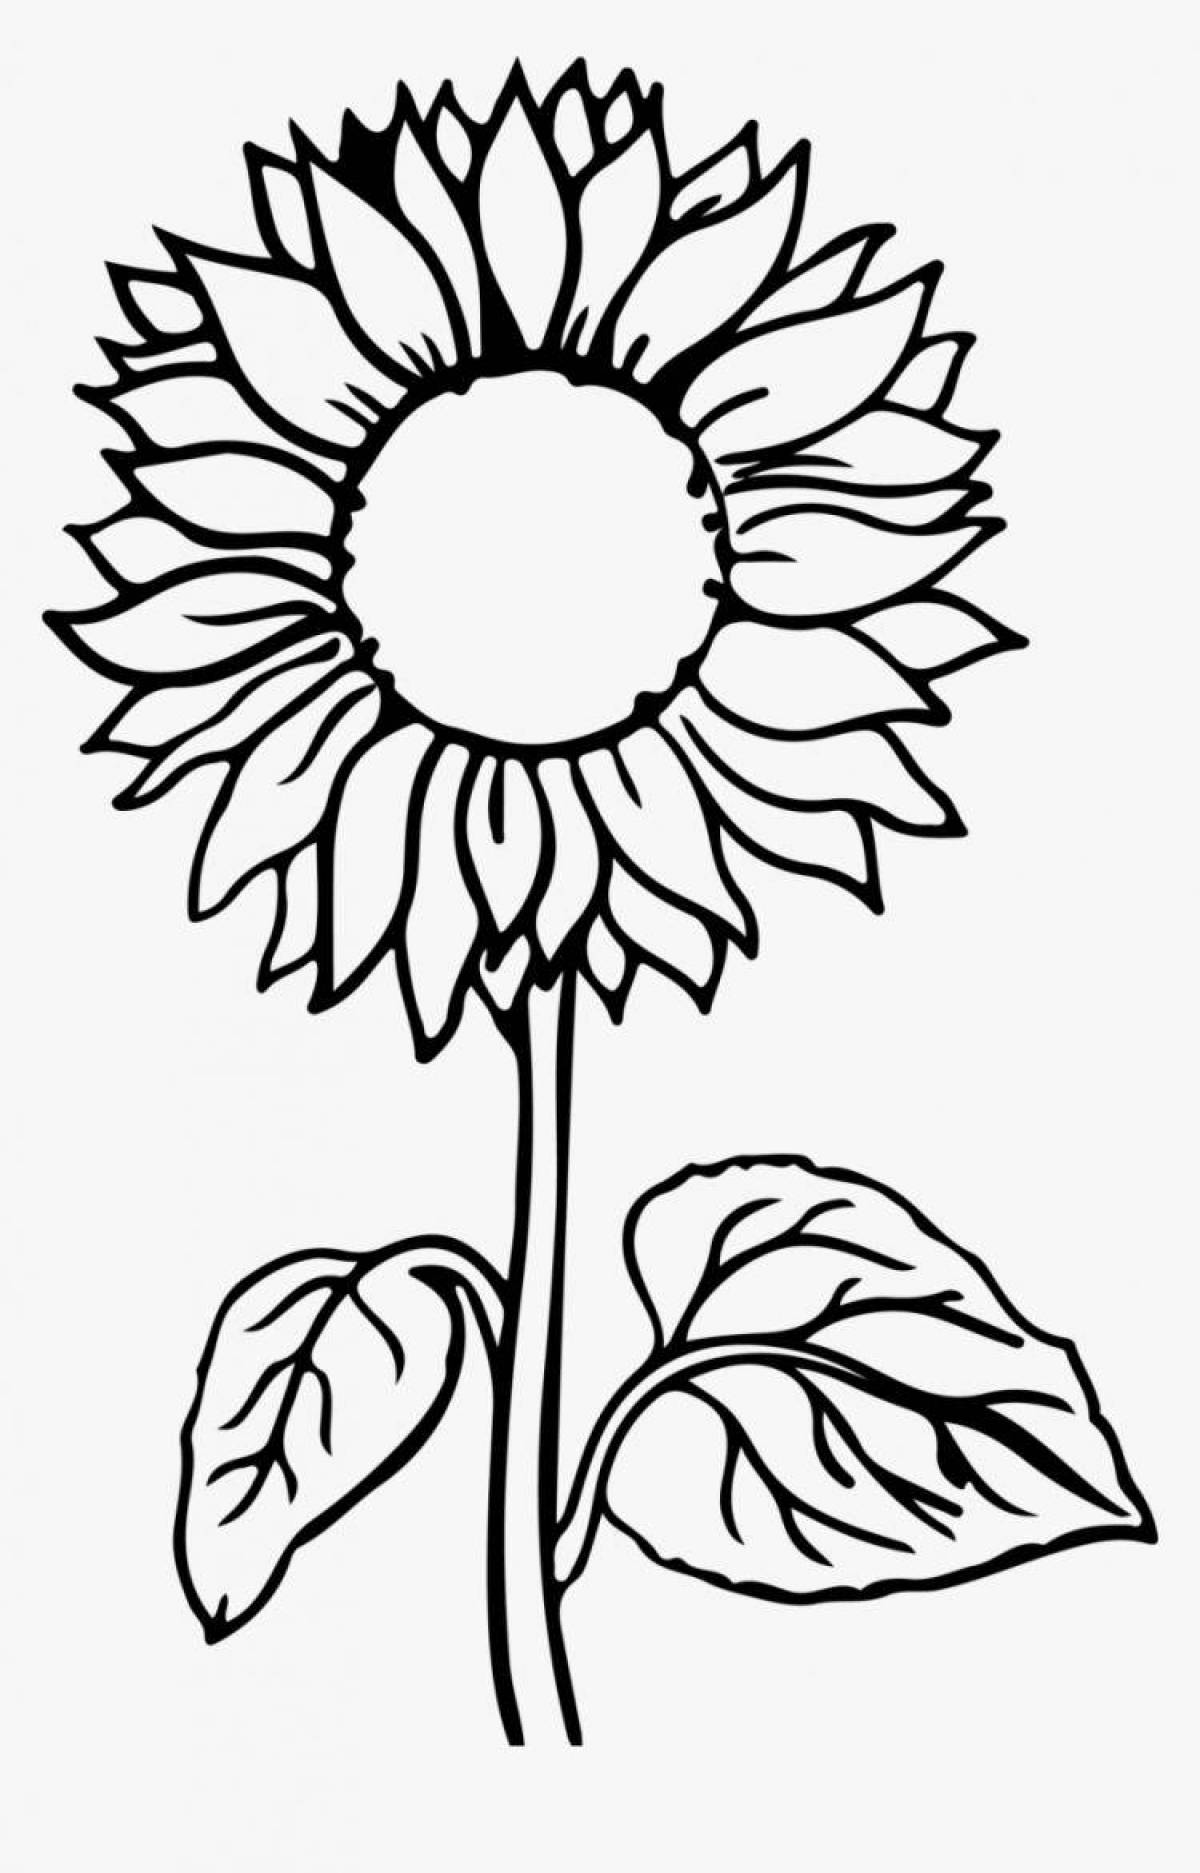 Incredible sunflowers coloring book for kids